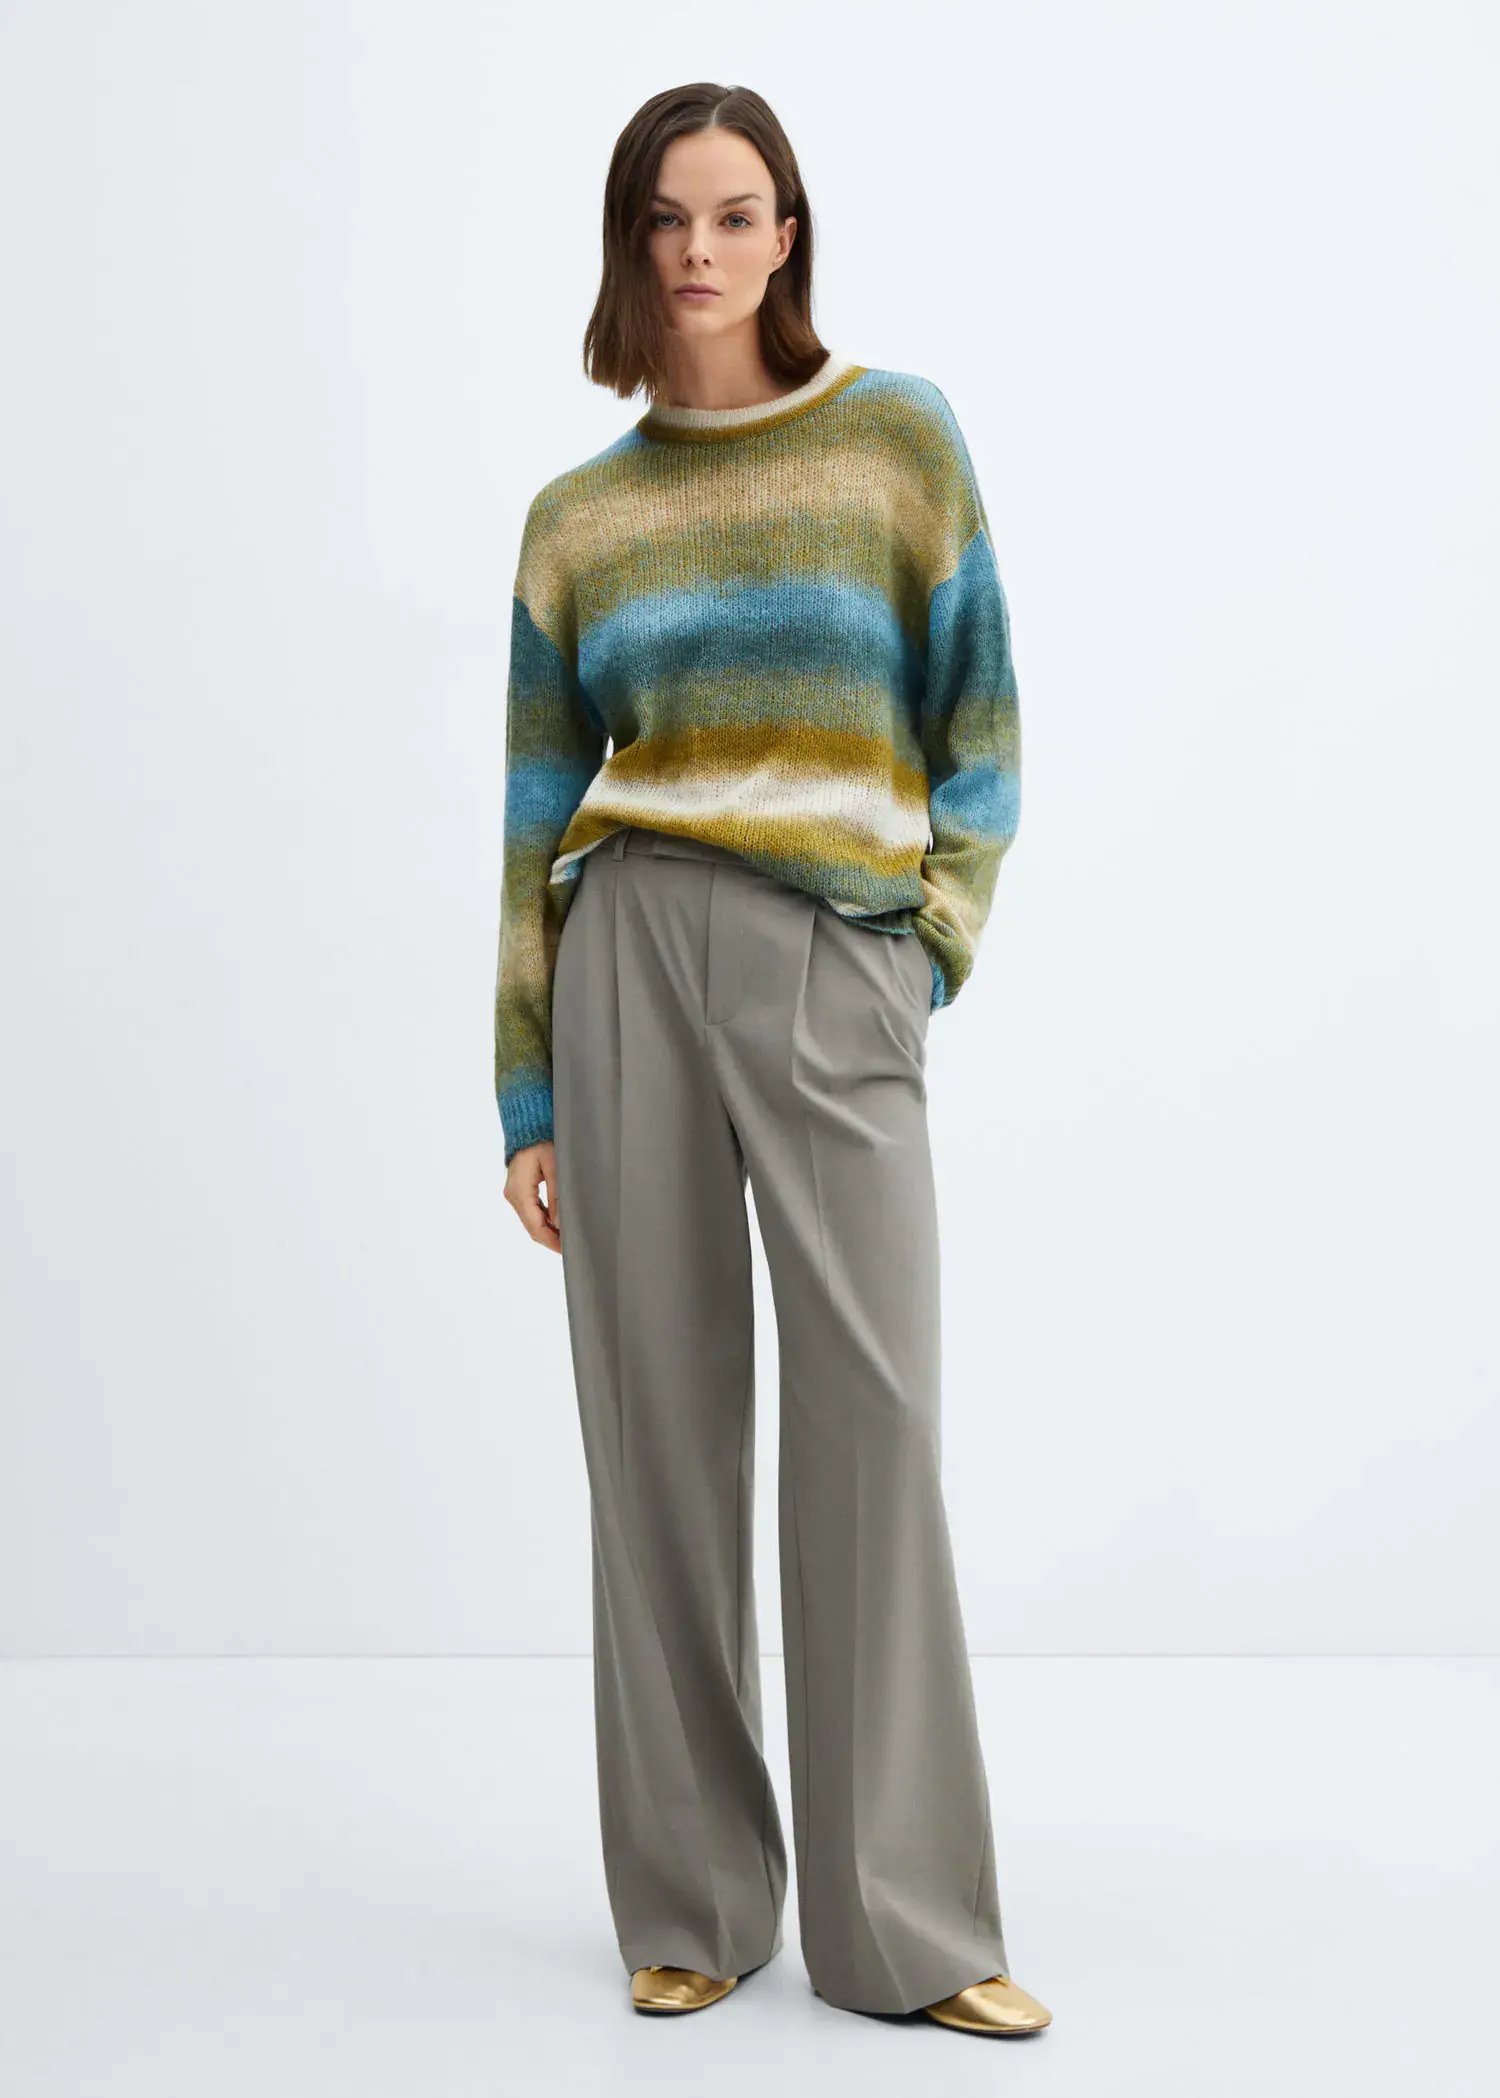 Mango Degraded knitted sweater. 1